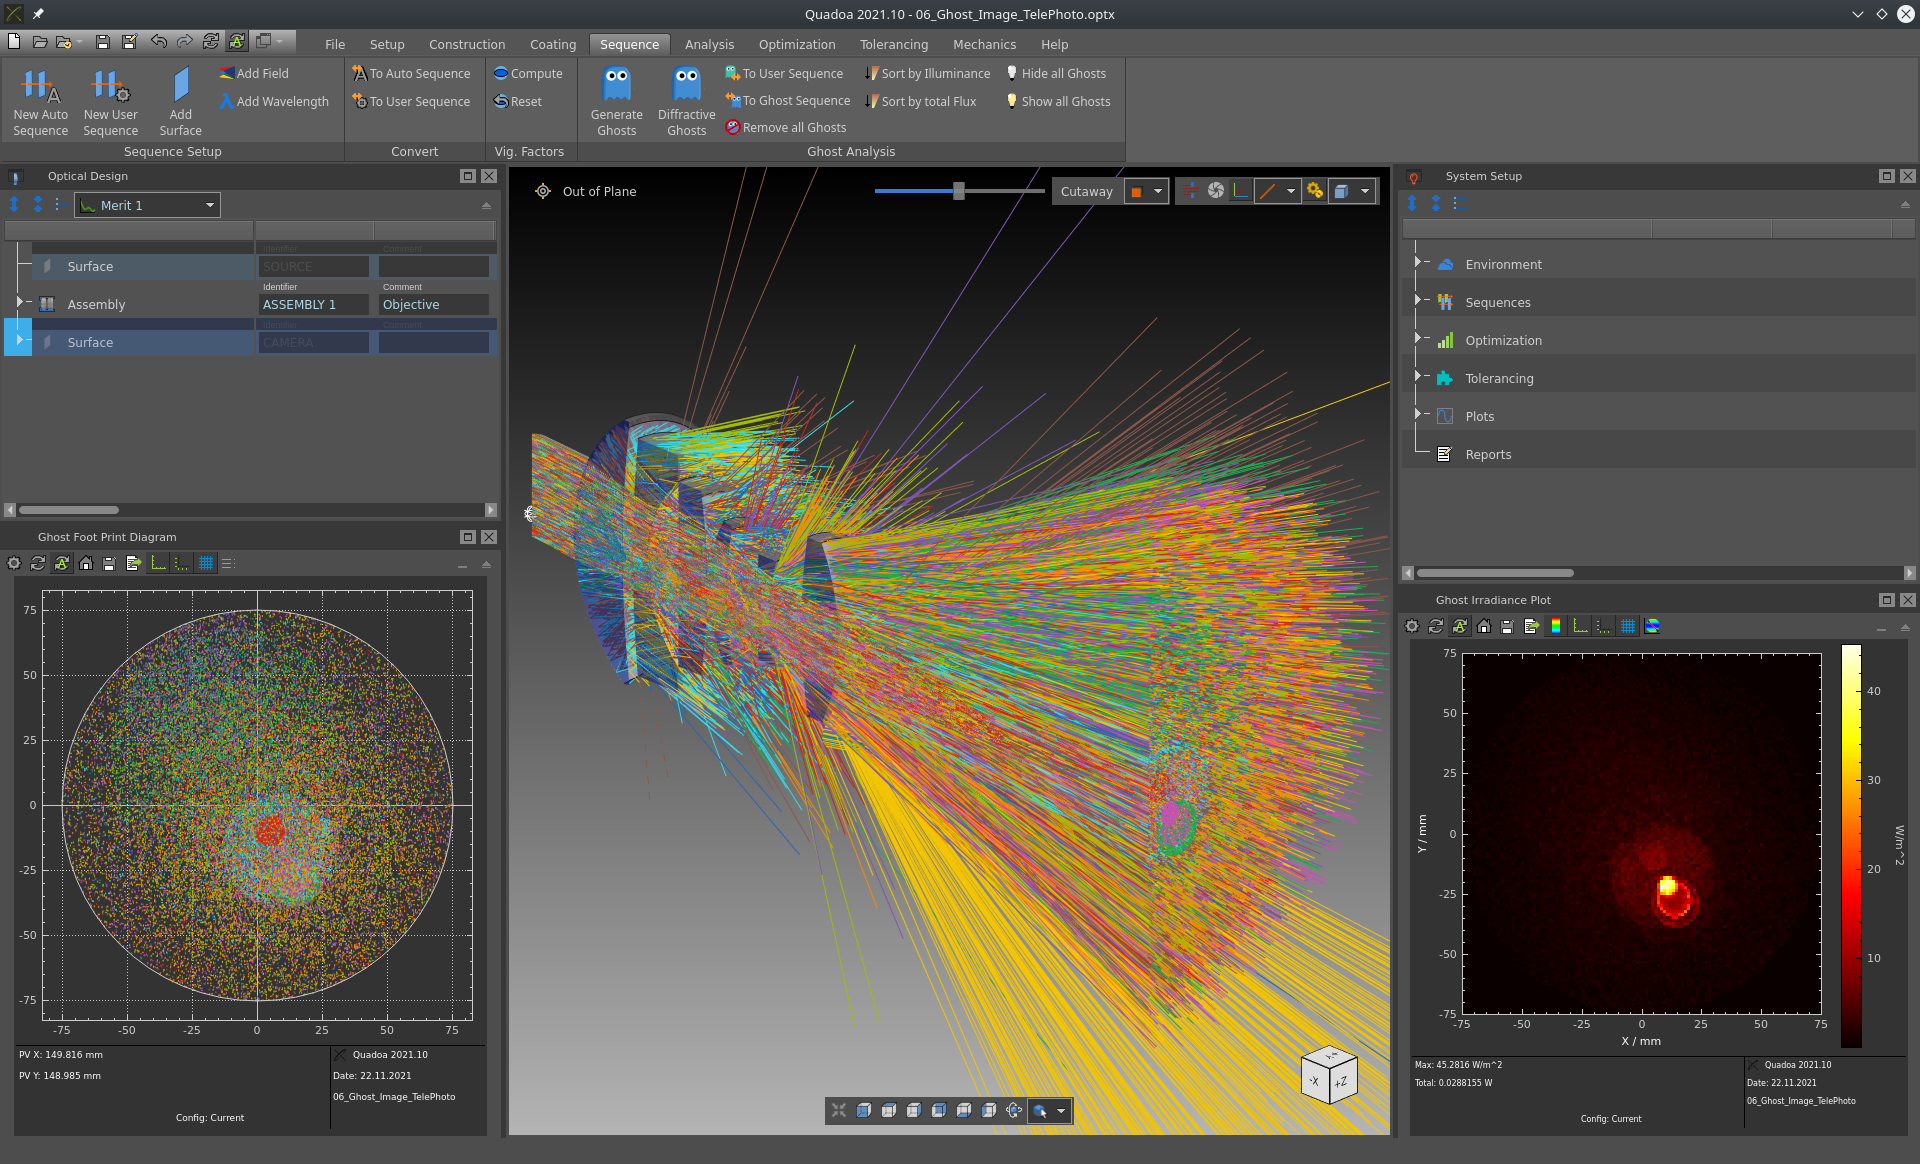 Live ghost- and reflex analysis in the optical design software Quadoa Optical CAD